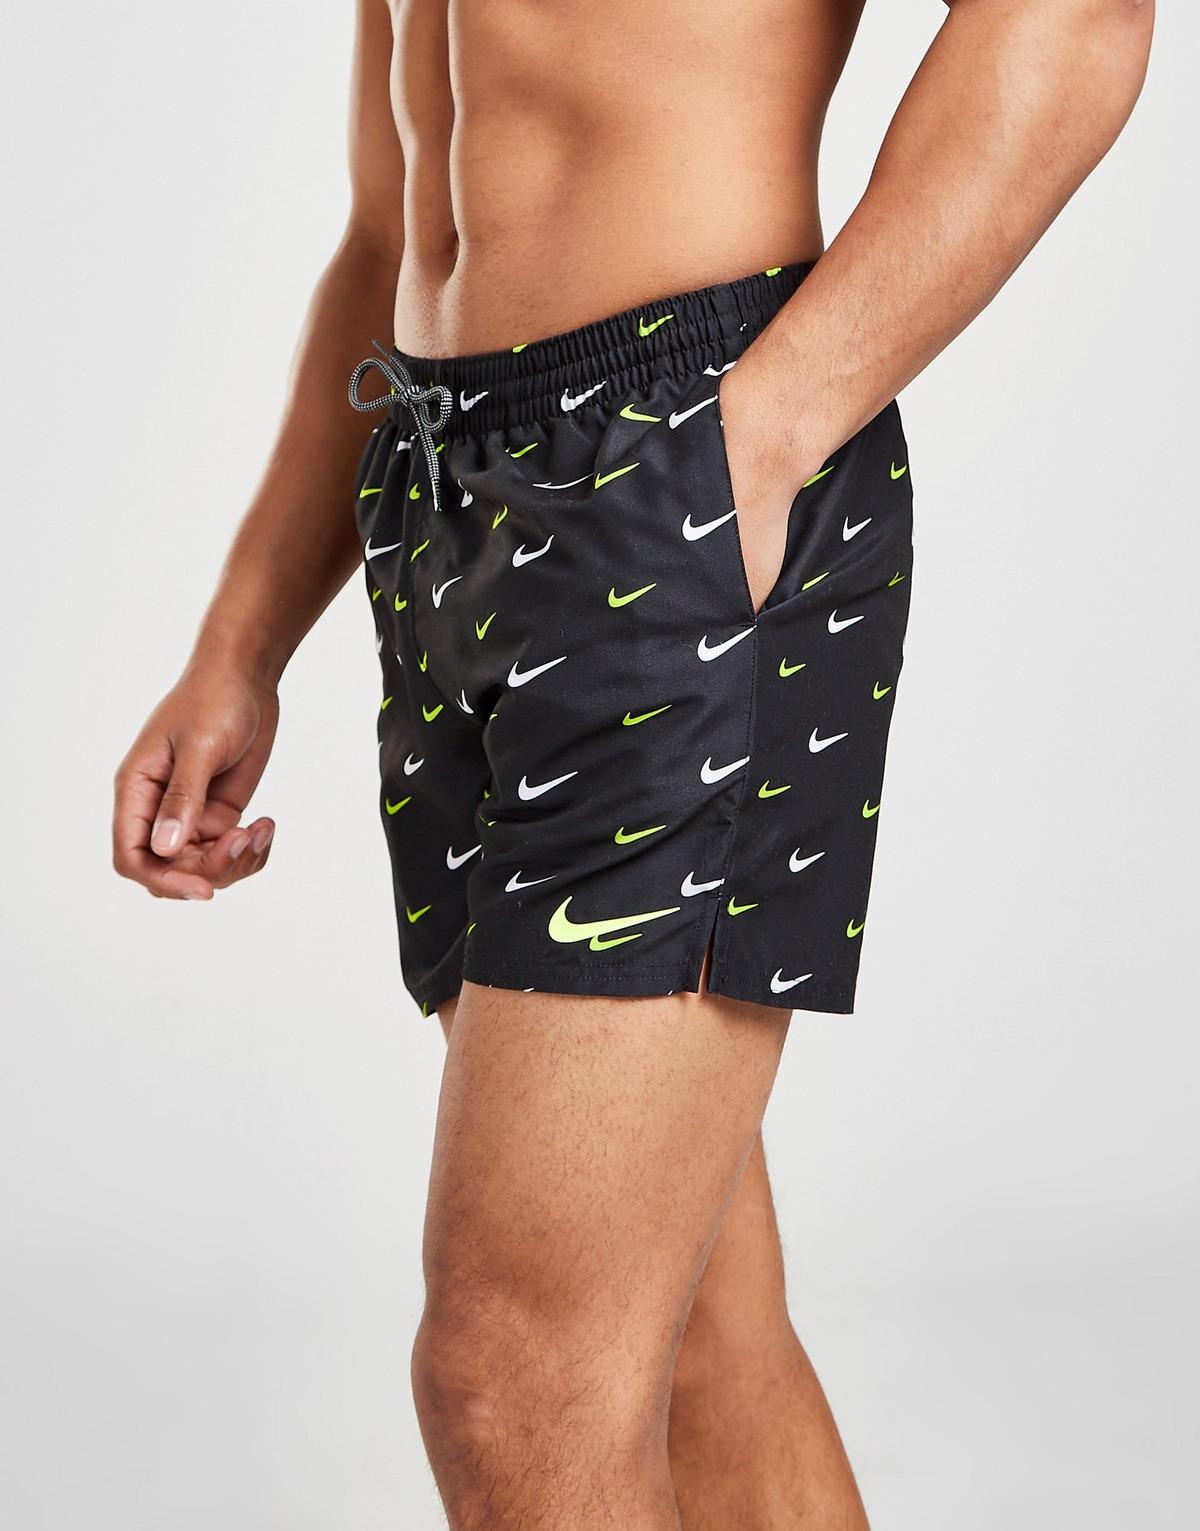 Nike All Over Print Swim Shorts Ireland, SAVE 37% - aveclumiere.com